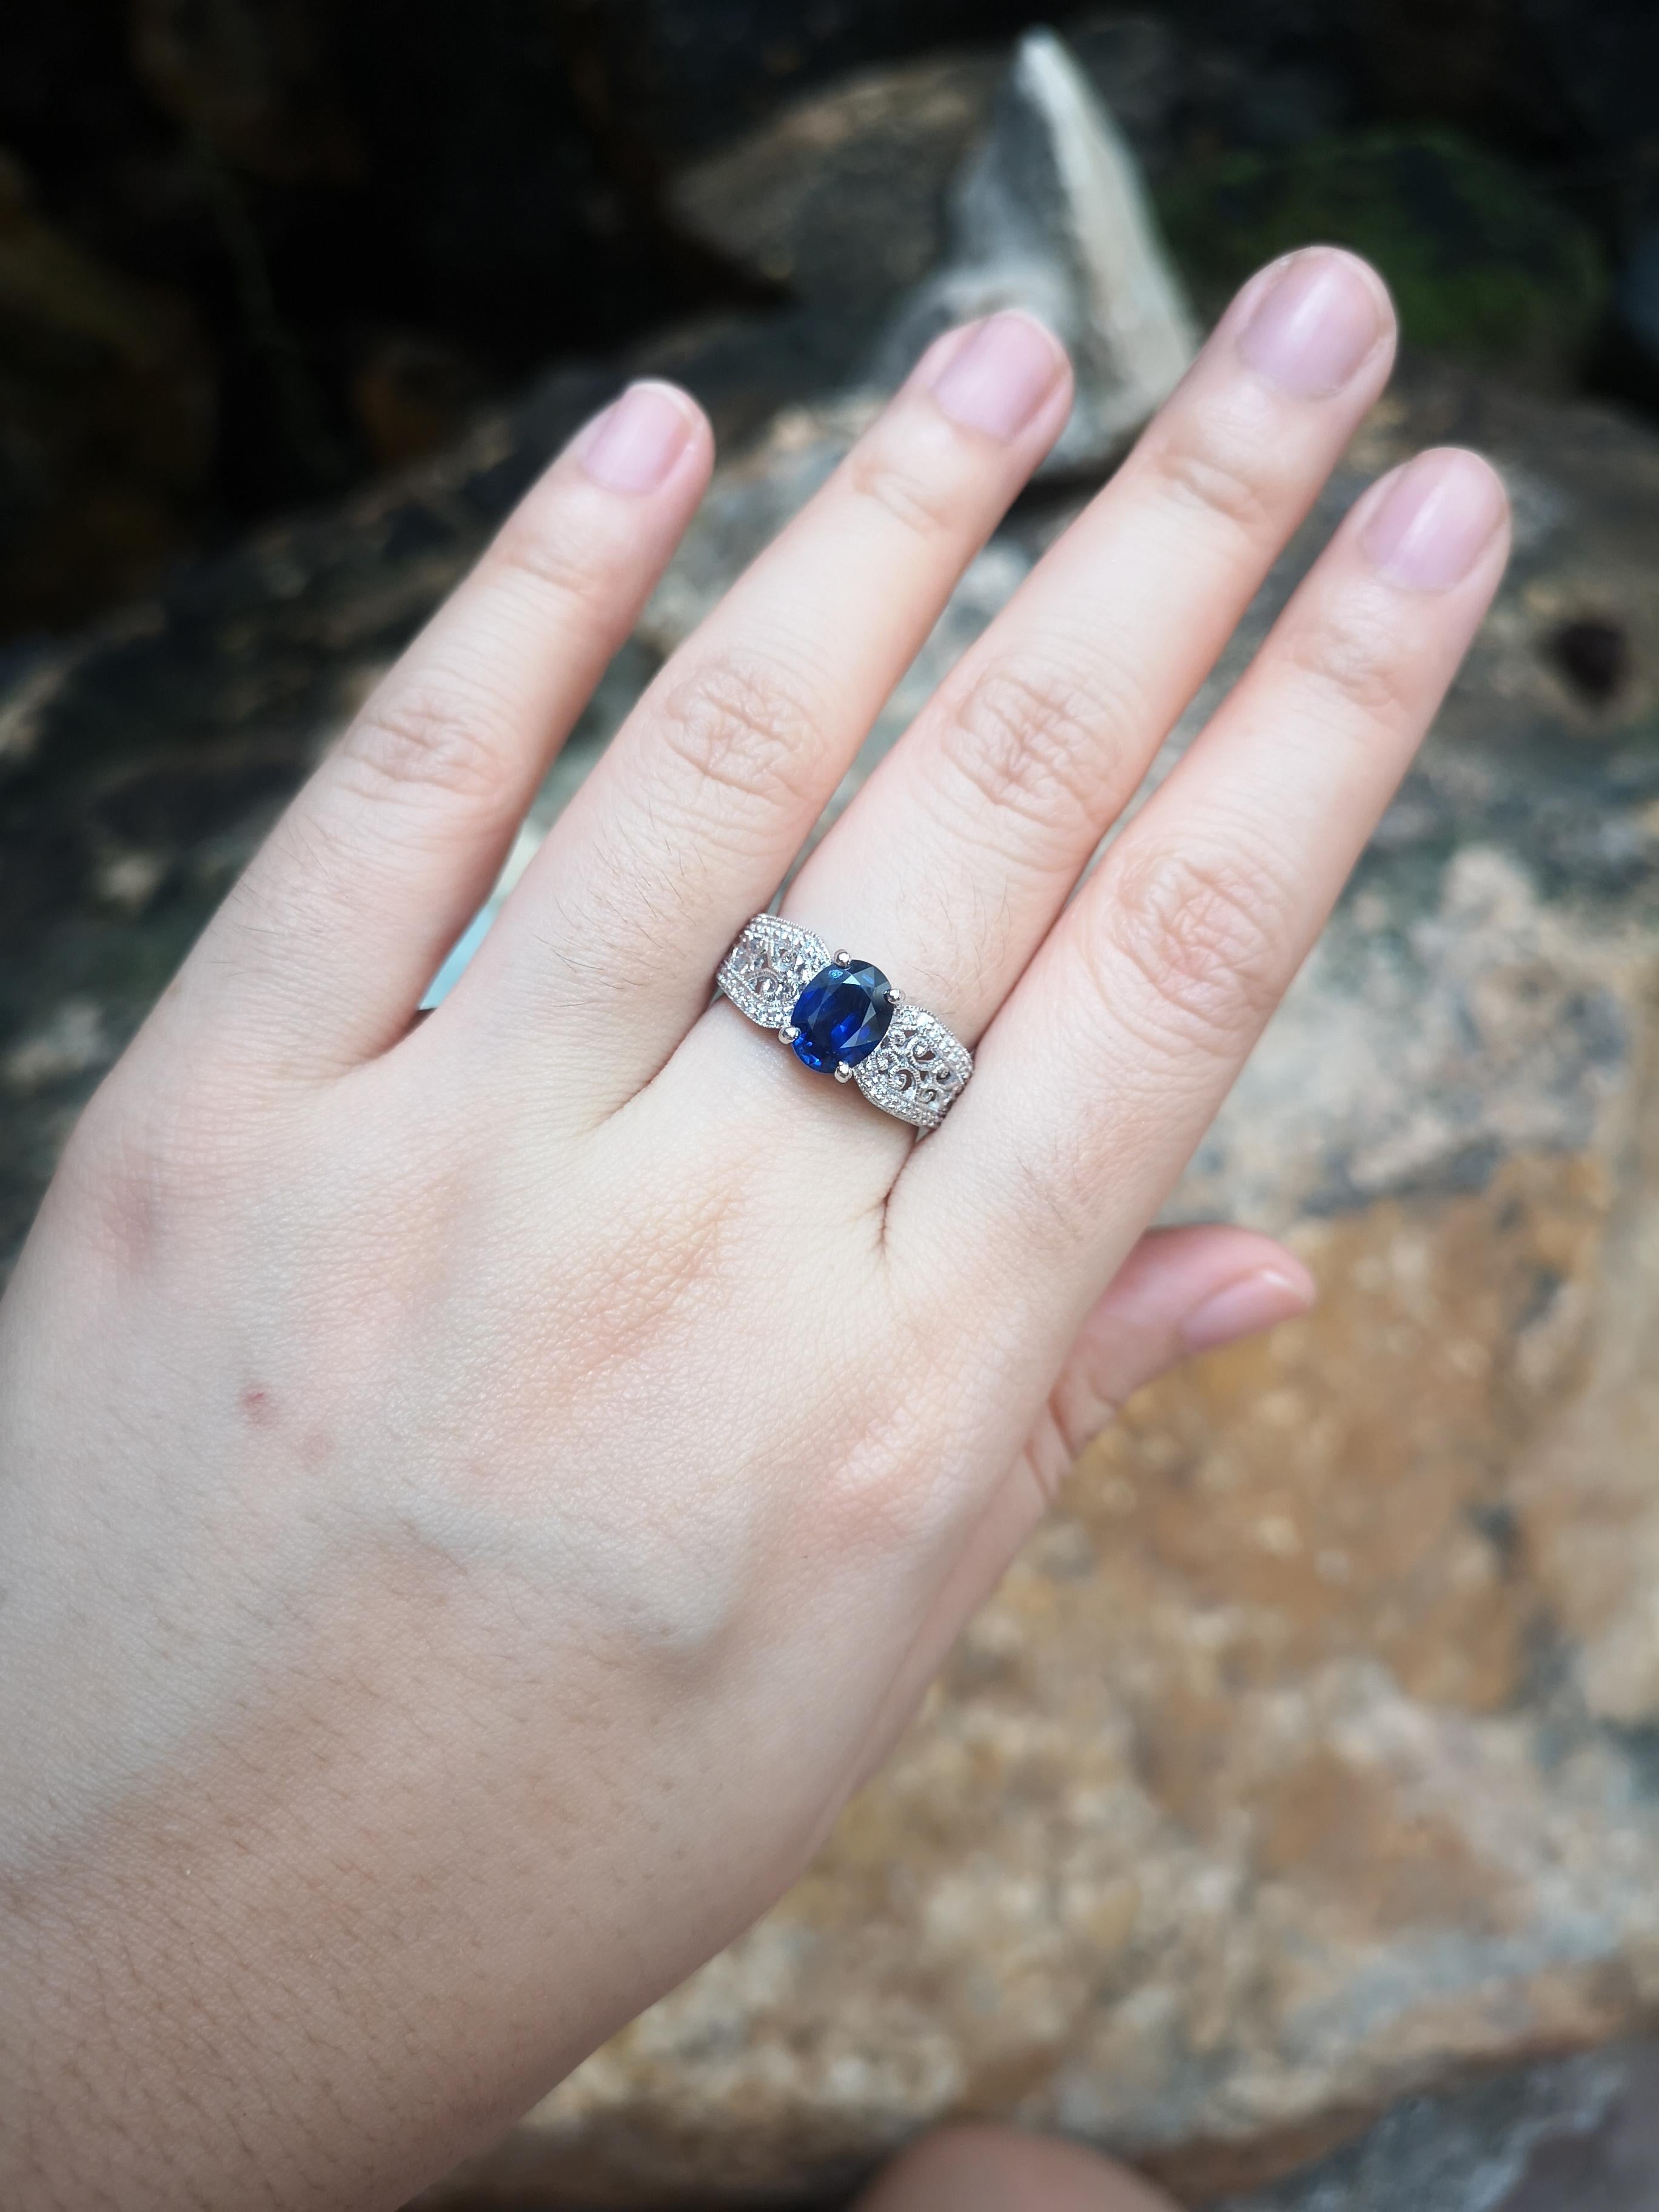 Blue Sapphire 1.27 carats with Diamond 0.21 carat Ring set in 18 Karat White Gold Settings

Width:  0.6 cm 
Length: 0.9 cm
Ring Size: 57
Total Weight: 7.19 grams

